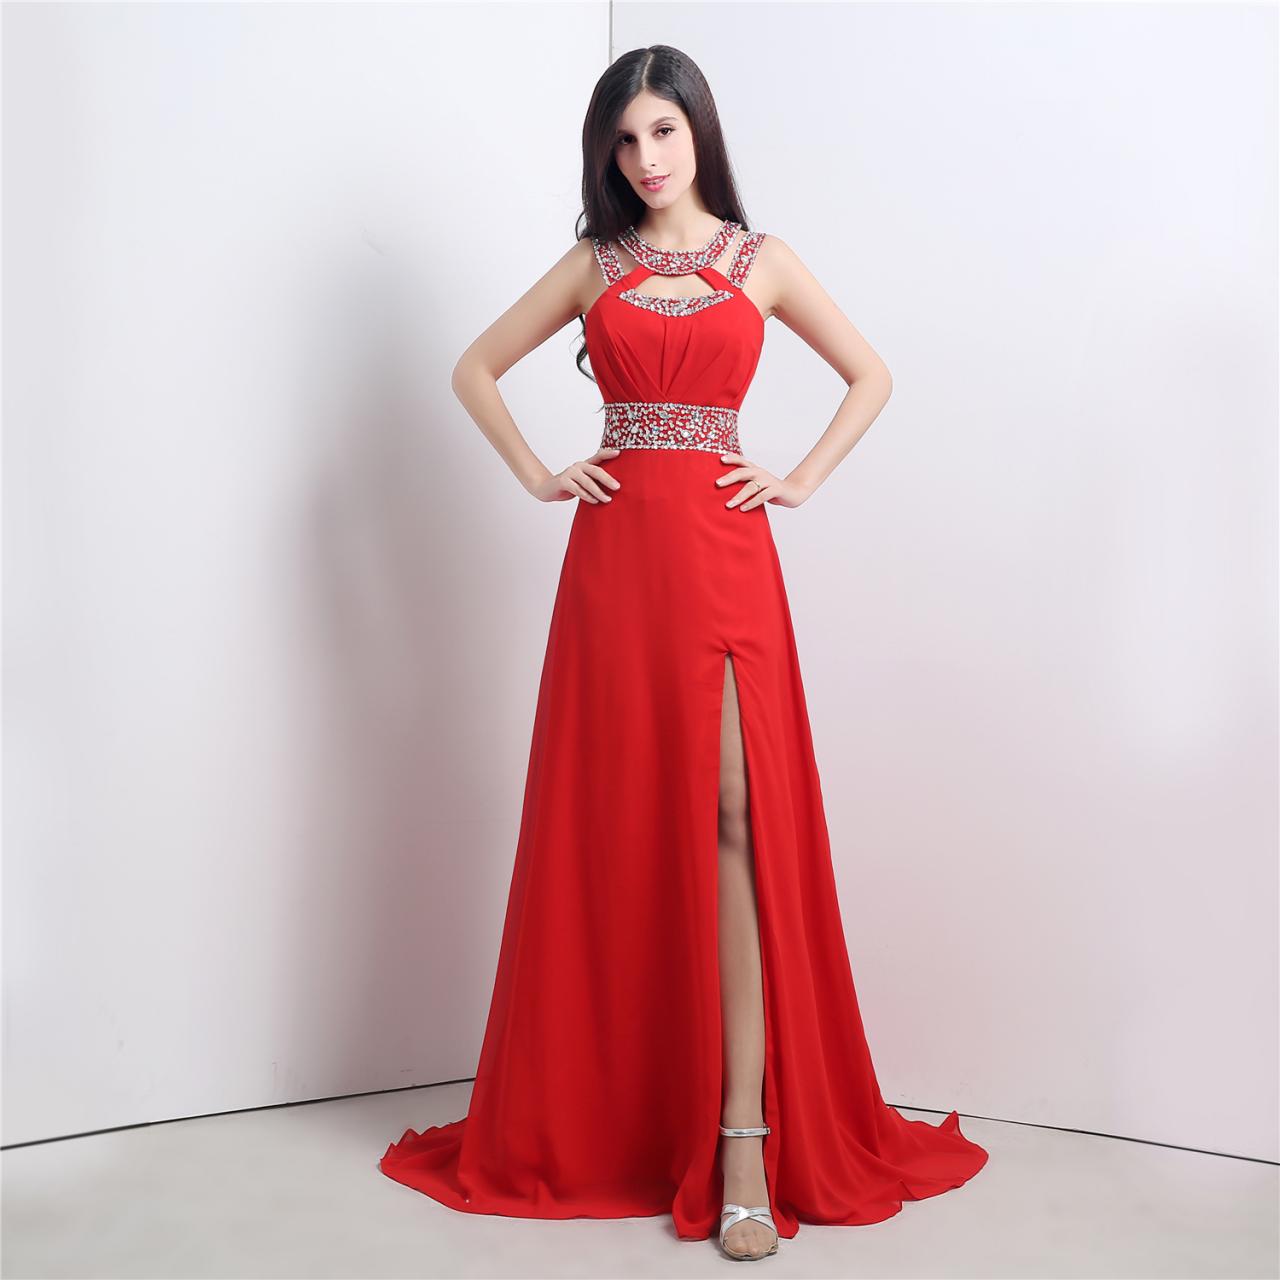 Red Prom Dress,Beading Prom Dresses,Formal Evening Gowns,Banquet Dress ...